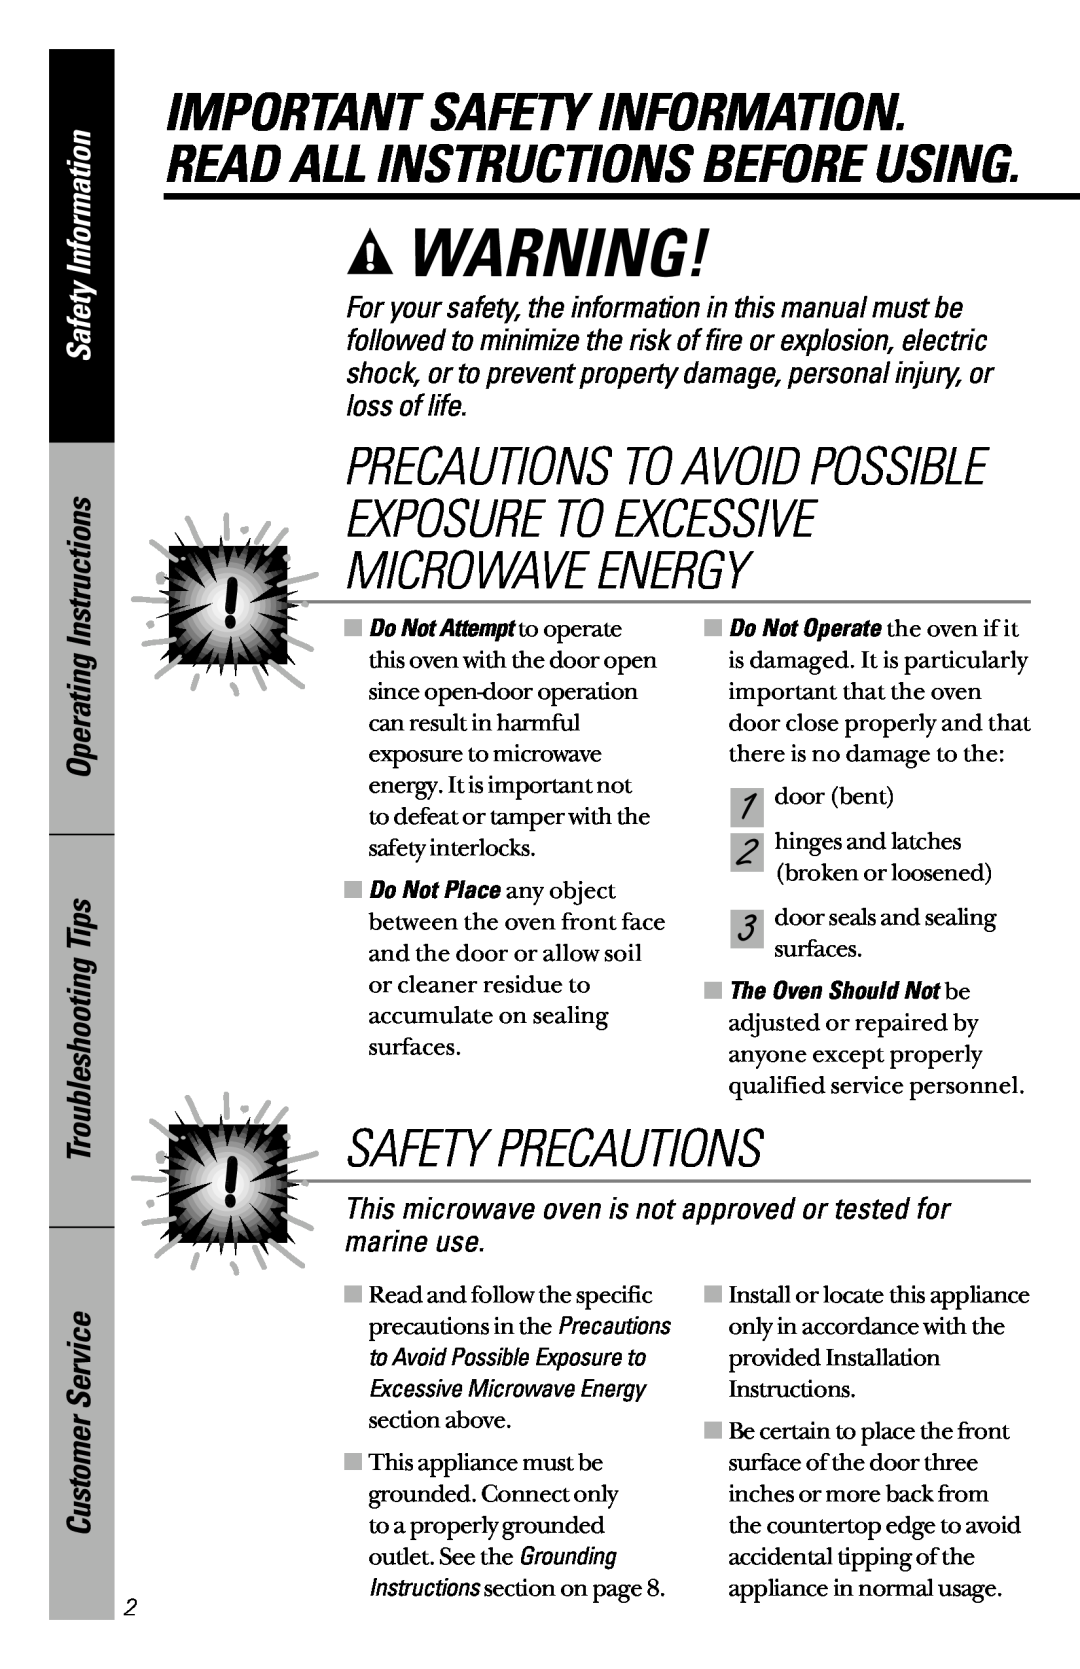 GE JES733 Exposure To Excessive Microwave Energy, Safety Precautions, Precautions To Avoid Possible, Safety Information 